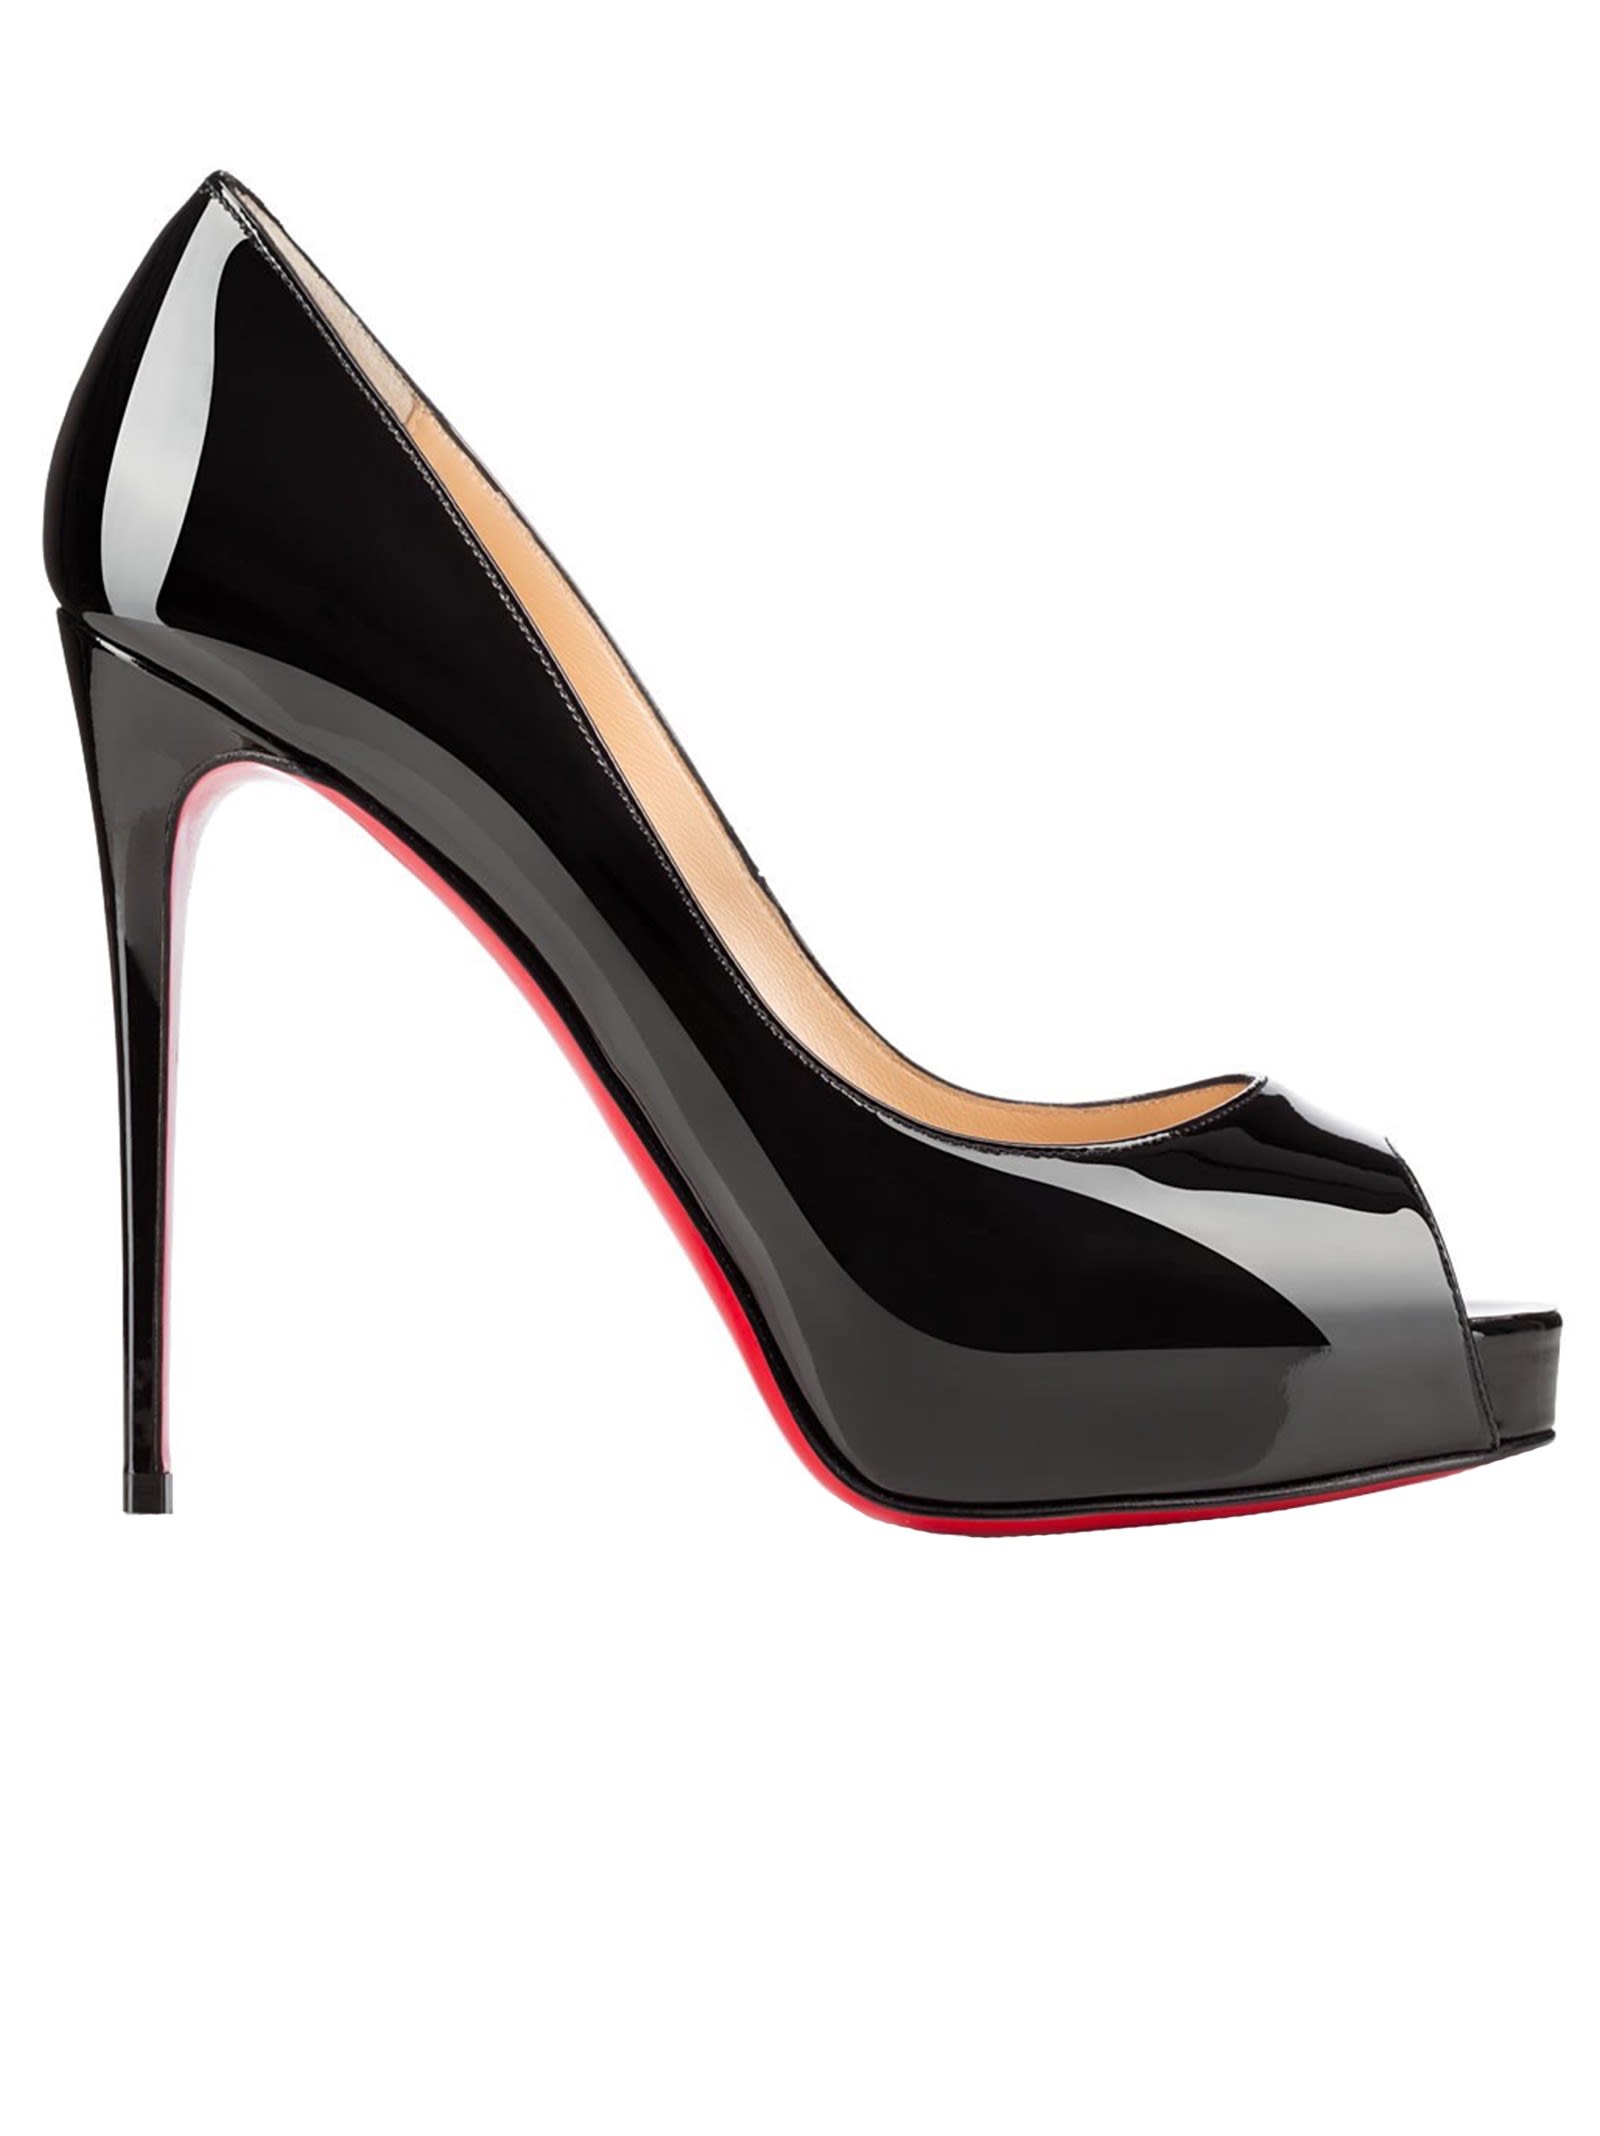 Christian Louboutin New Very Prive 120 Black Patent Leather Open Toe